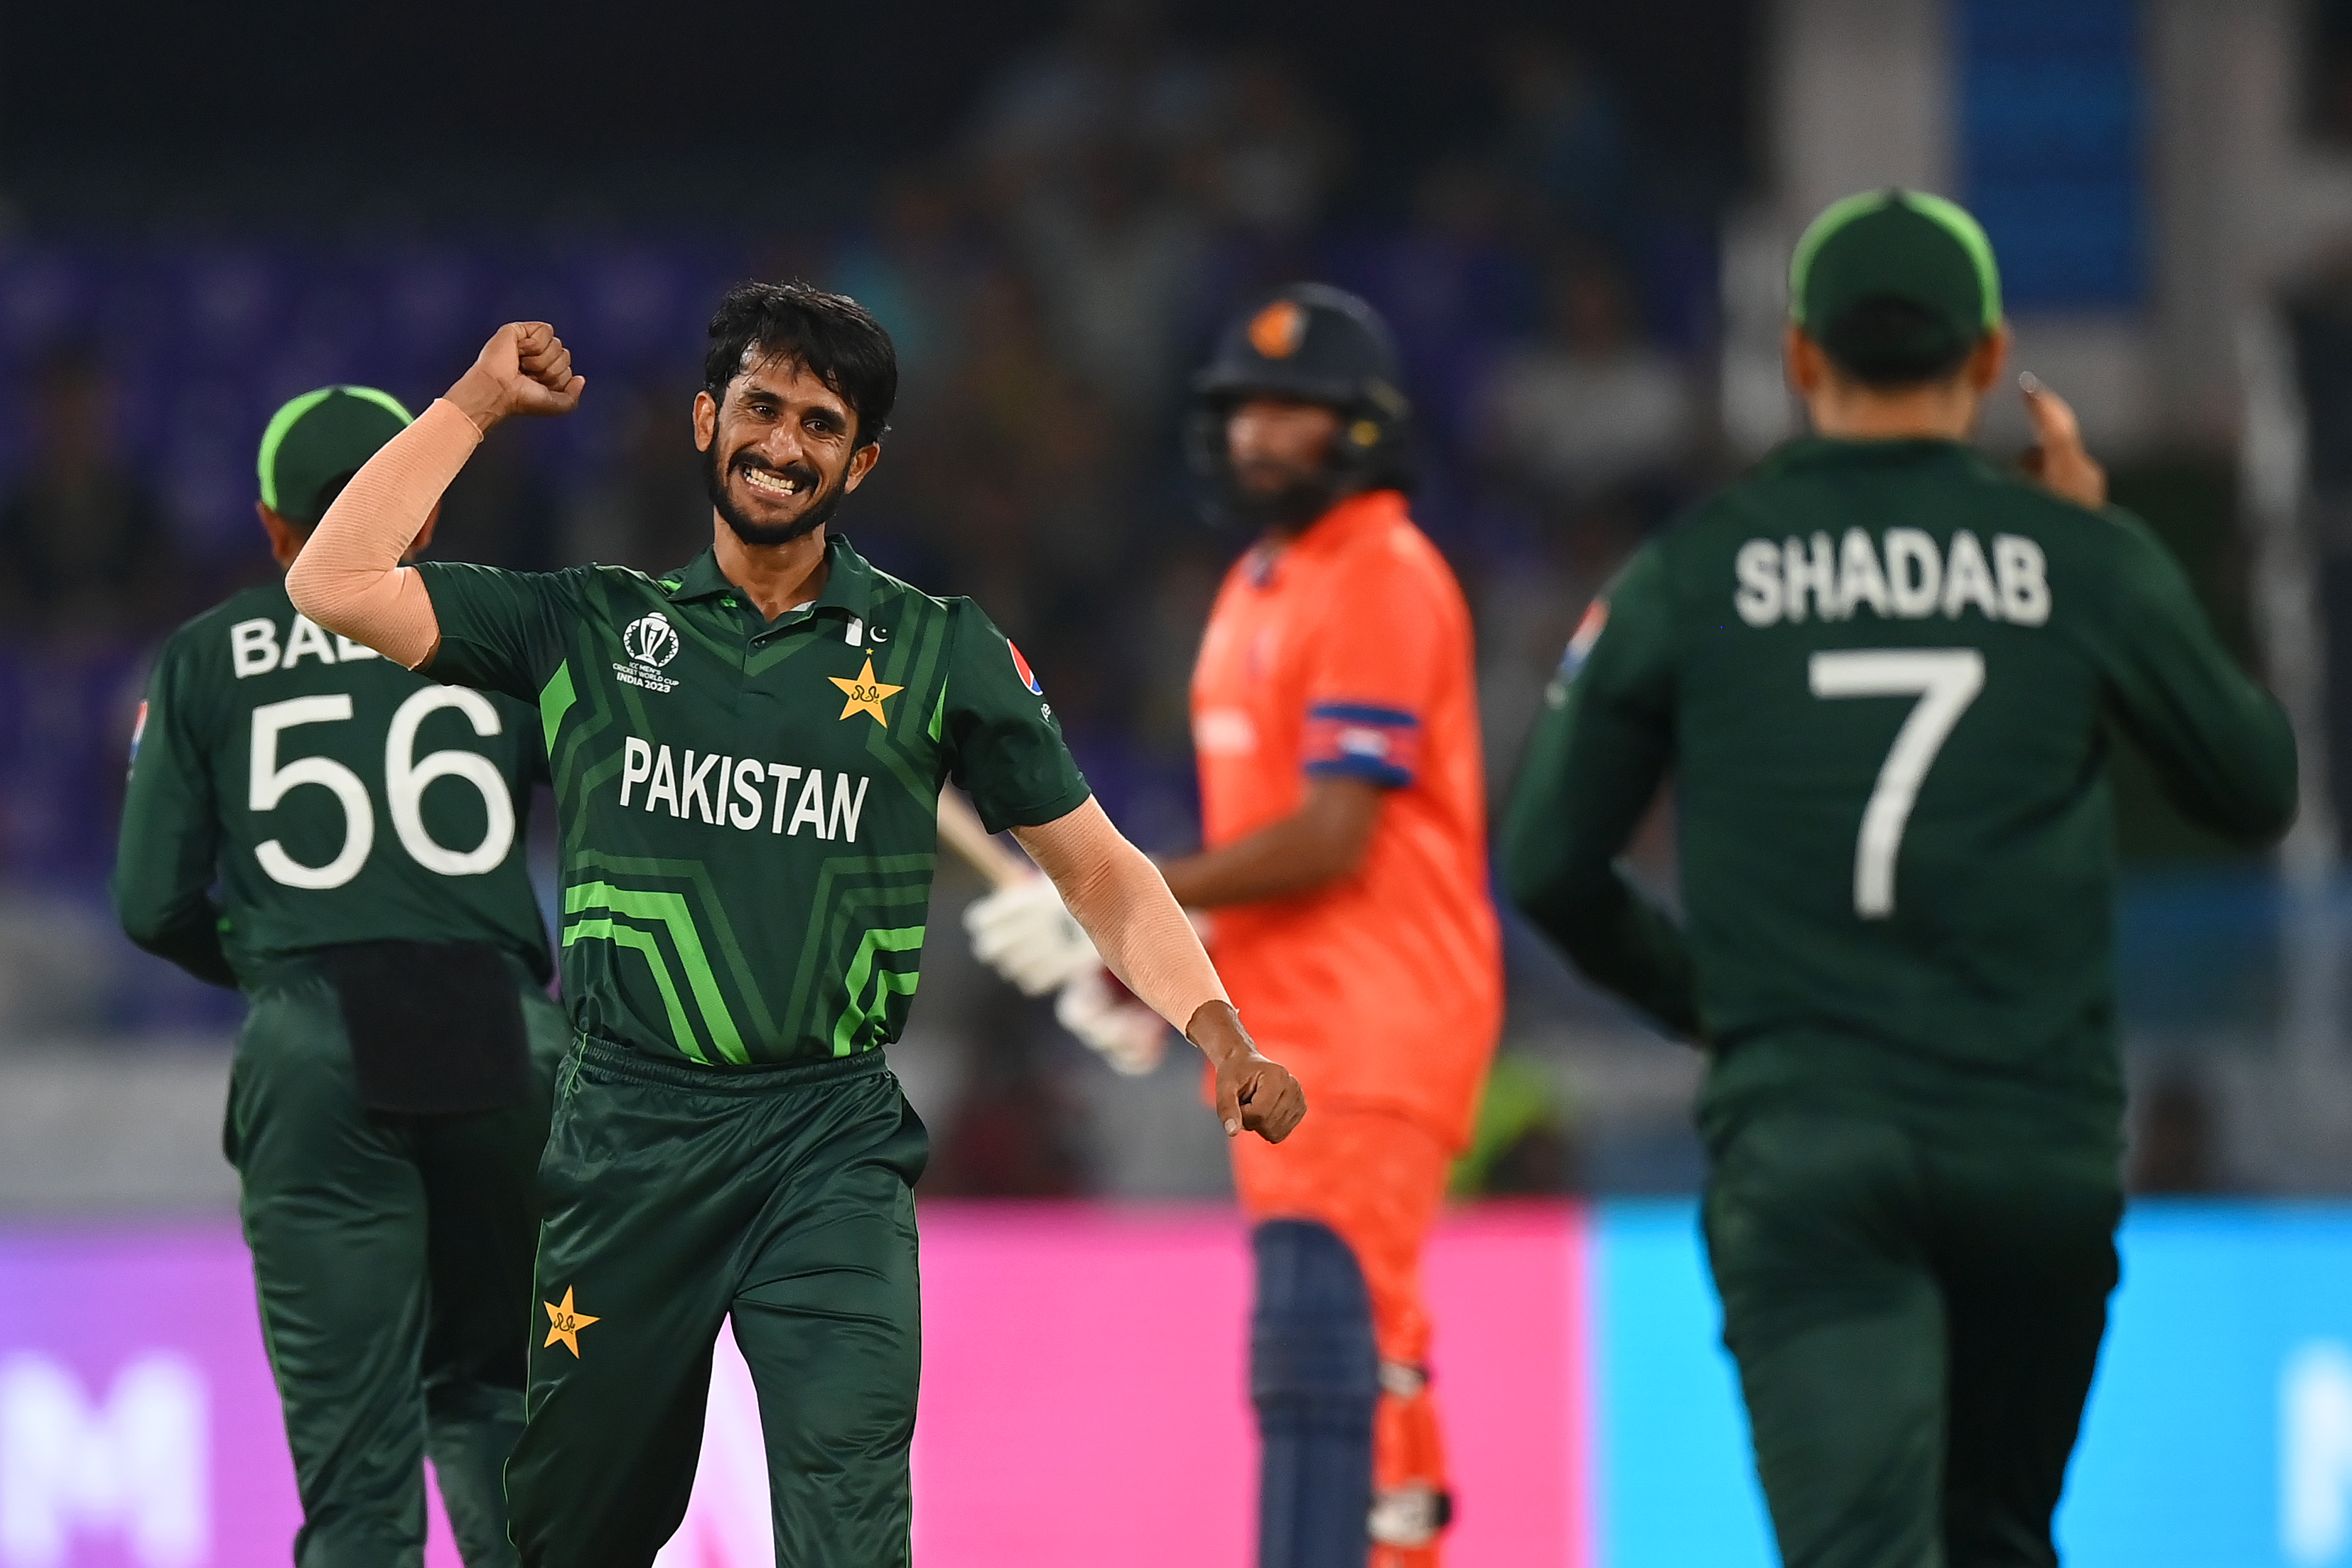 PAK VS NED | Twitter reacts as Pakistan see off resiliant Netherlands in Hyderabad opener